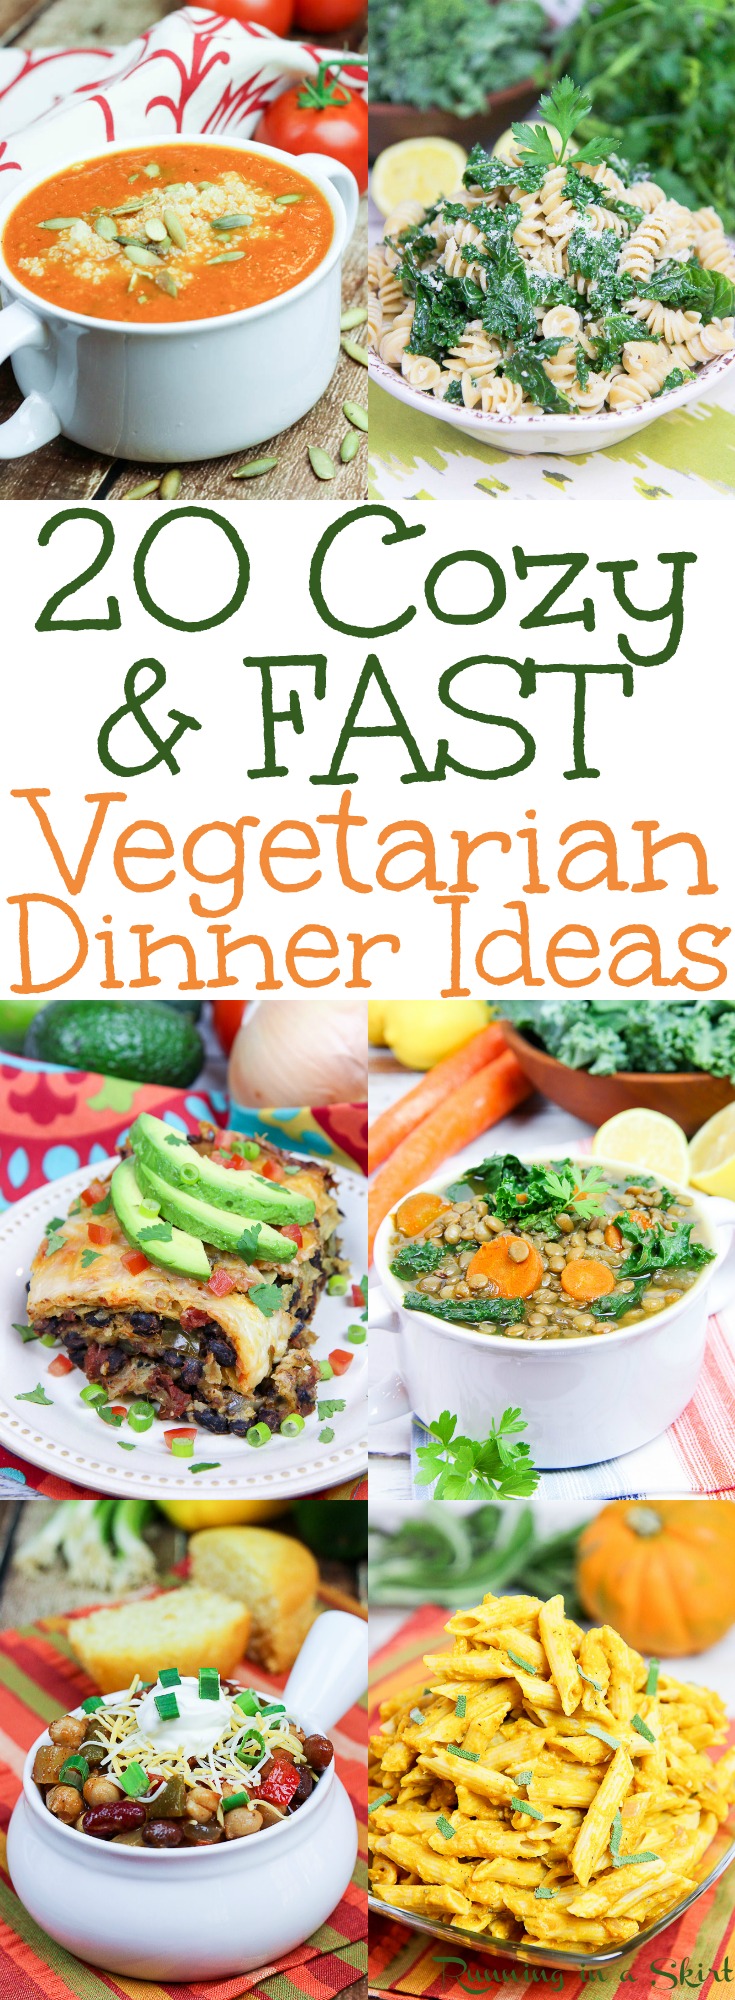 20 Cozy, Quick, Healthy & Hearty Vegetarian Dinner Ideas. These are delicious 30 minute or less recipes or CrockPot / Slow Cooker meals. Includes a Lentil Soup, Tomato Quinoa Soup, Kale Whole Wheat Pasta and Crock Pot Enchilada Casserole. Simple, clean eating meals without meat! Includes vegan, low carb and gluten free options. Hearty enough for meat eaters and vegetarians alike. / Running in a Skirt via @juliewunder